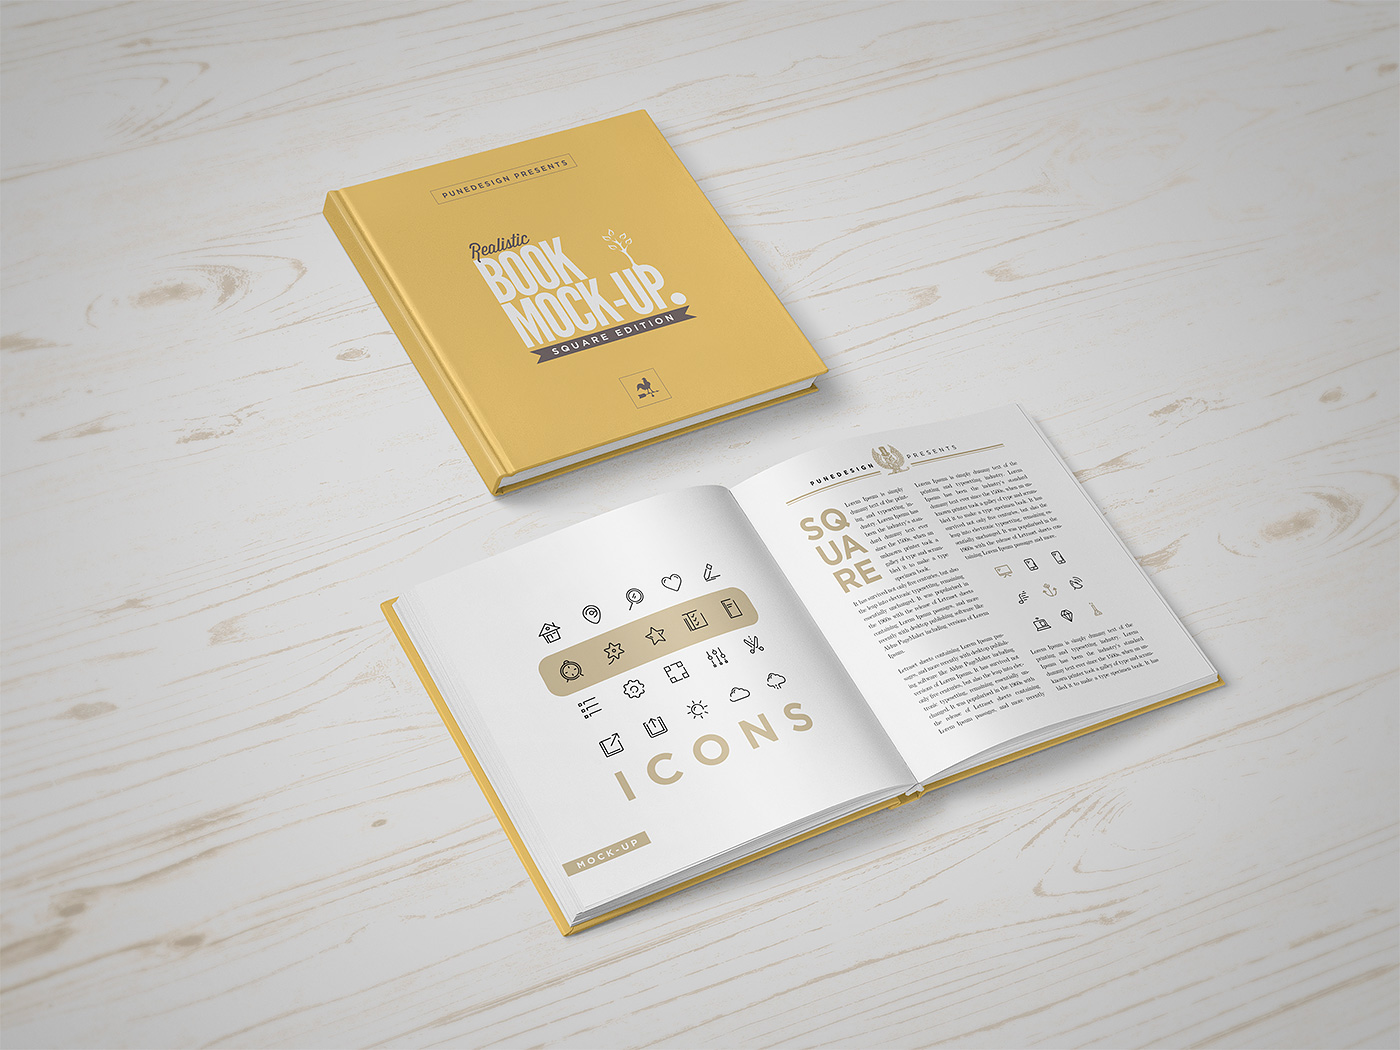 book cover book mockup cover design Display product ebook image mock-up mockup template paper presentation product mockup realistic showcase square book